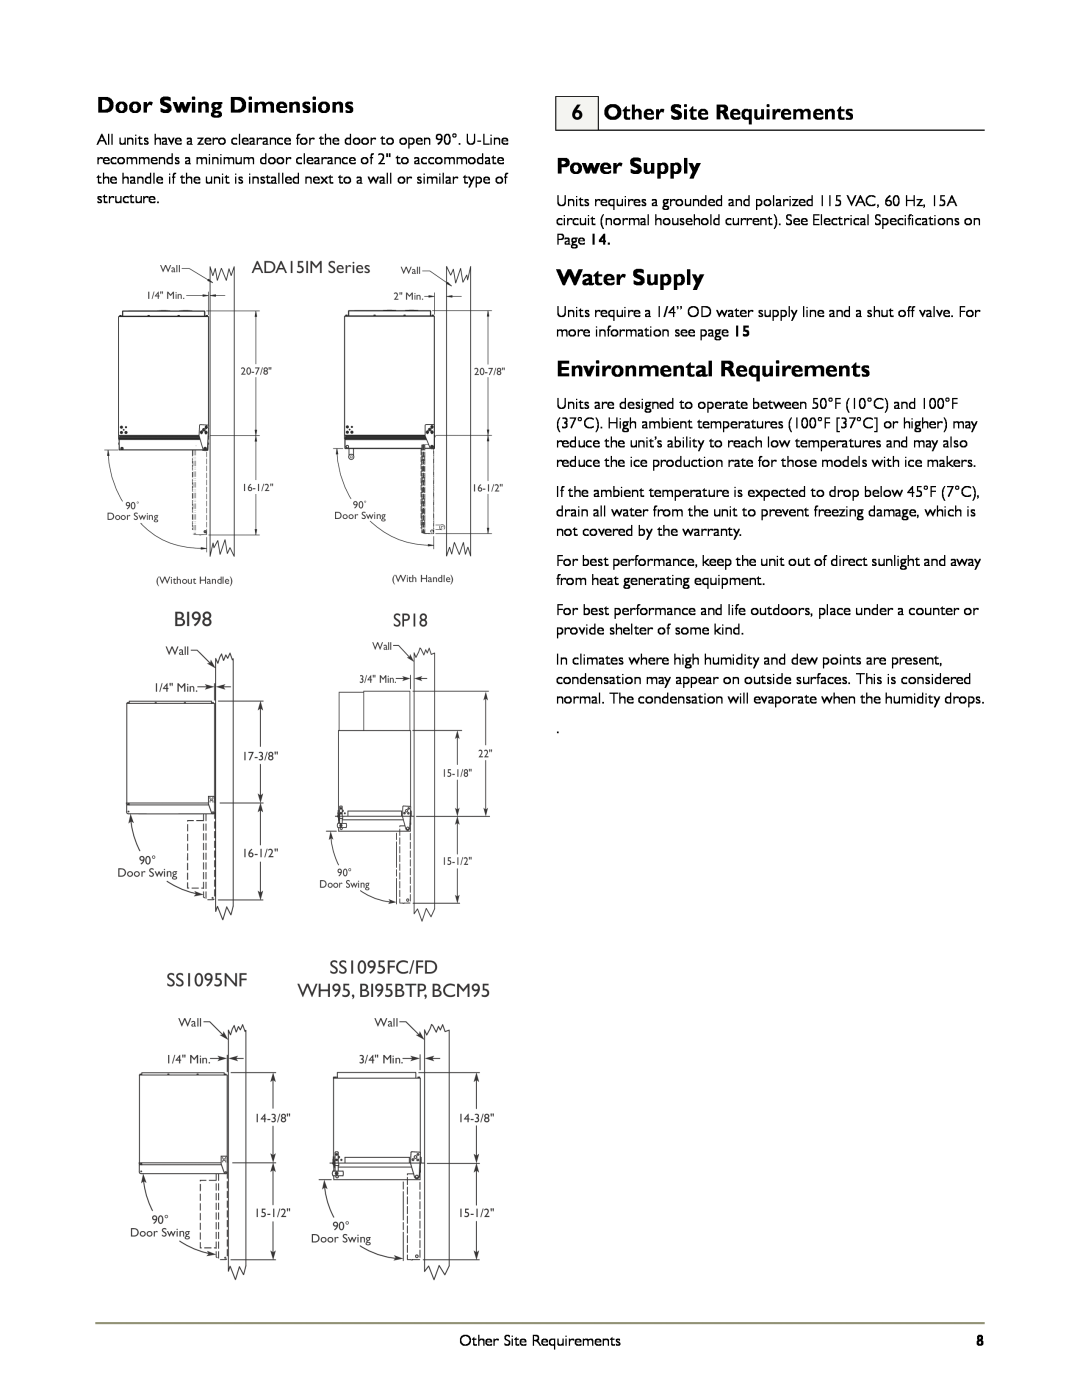 U-Line WH95 Door Swing Dimensions, Power Supply, Water Supply, Environmental Requirements, Other Site Requirements, BI98 